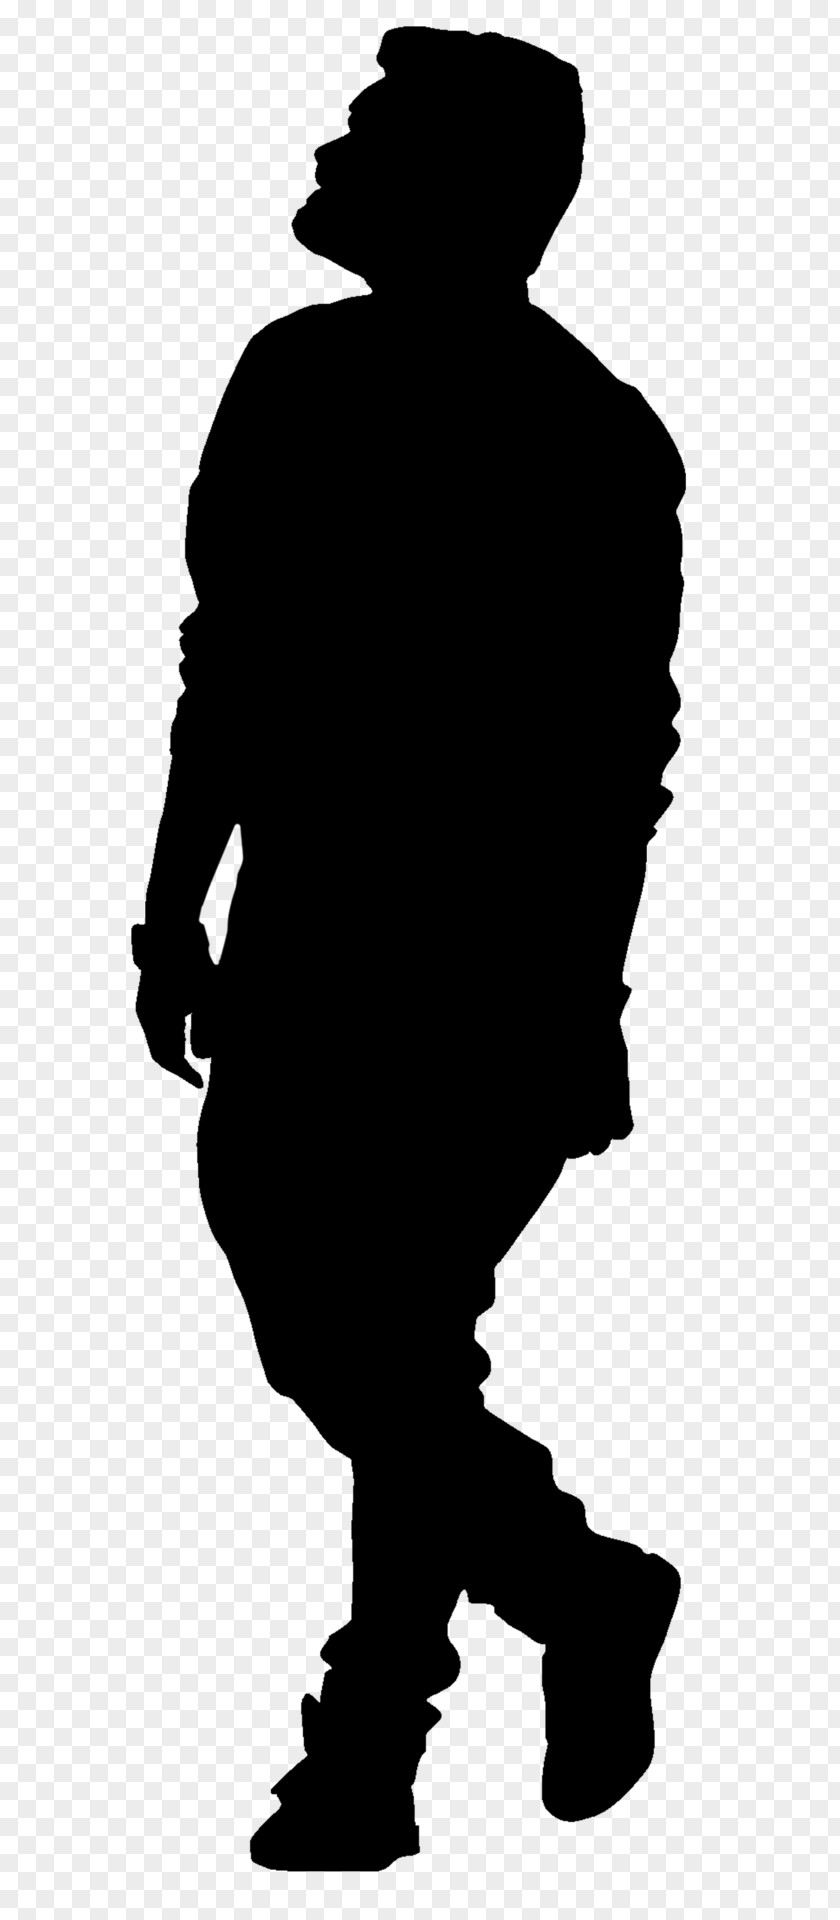 Image Silhouette Model Drawing Can Stock Photo PNG